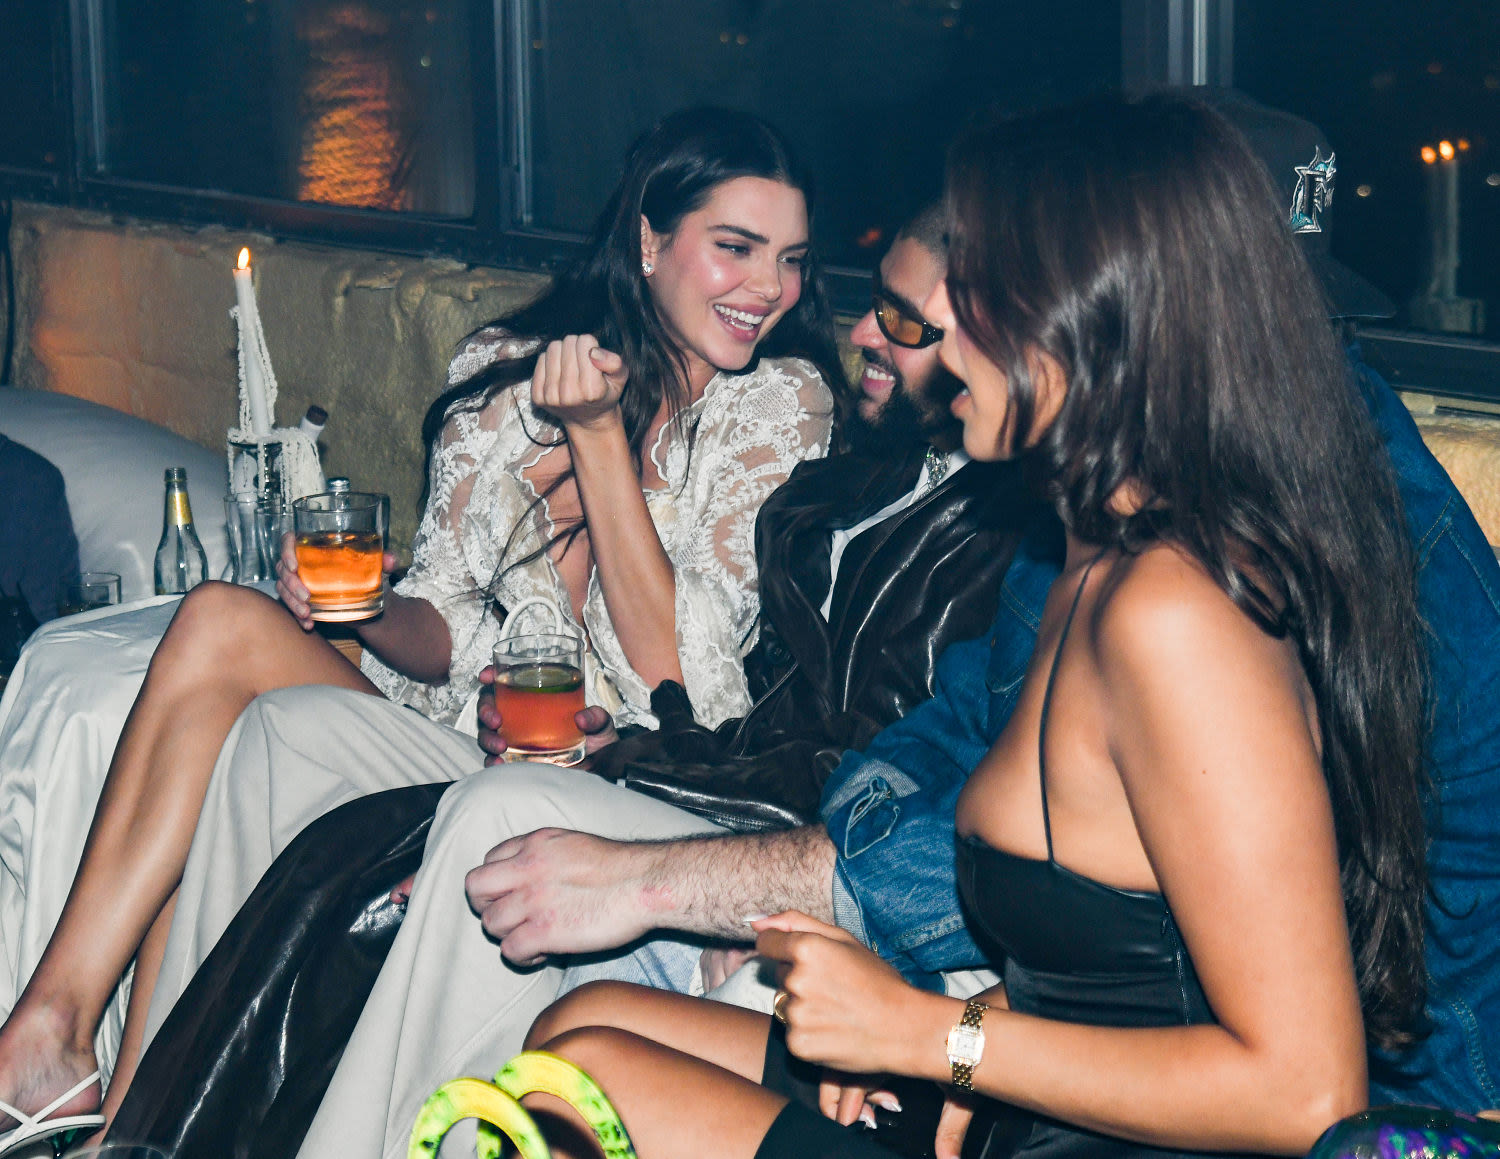 Bad Bunny and Kendall Jenner Met Gala photo sparks rumors they've rekindled their romance